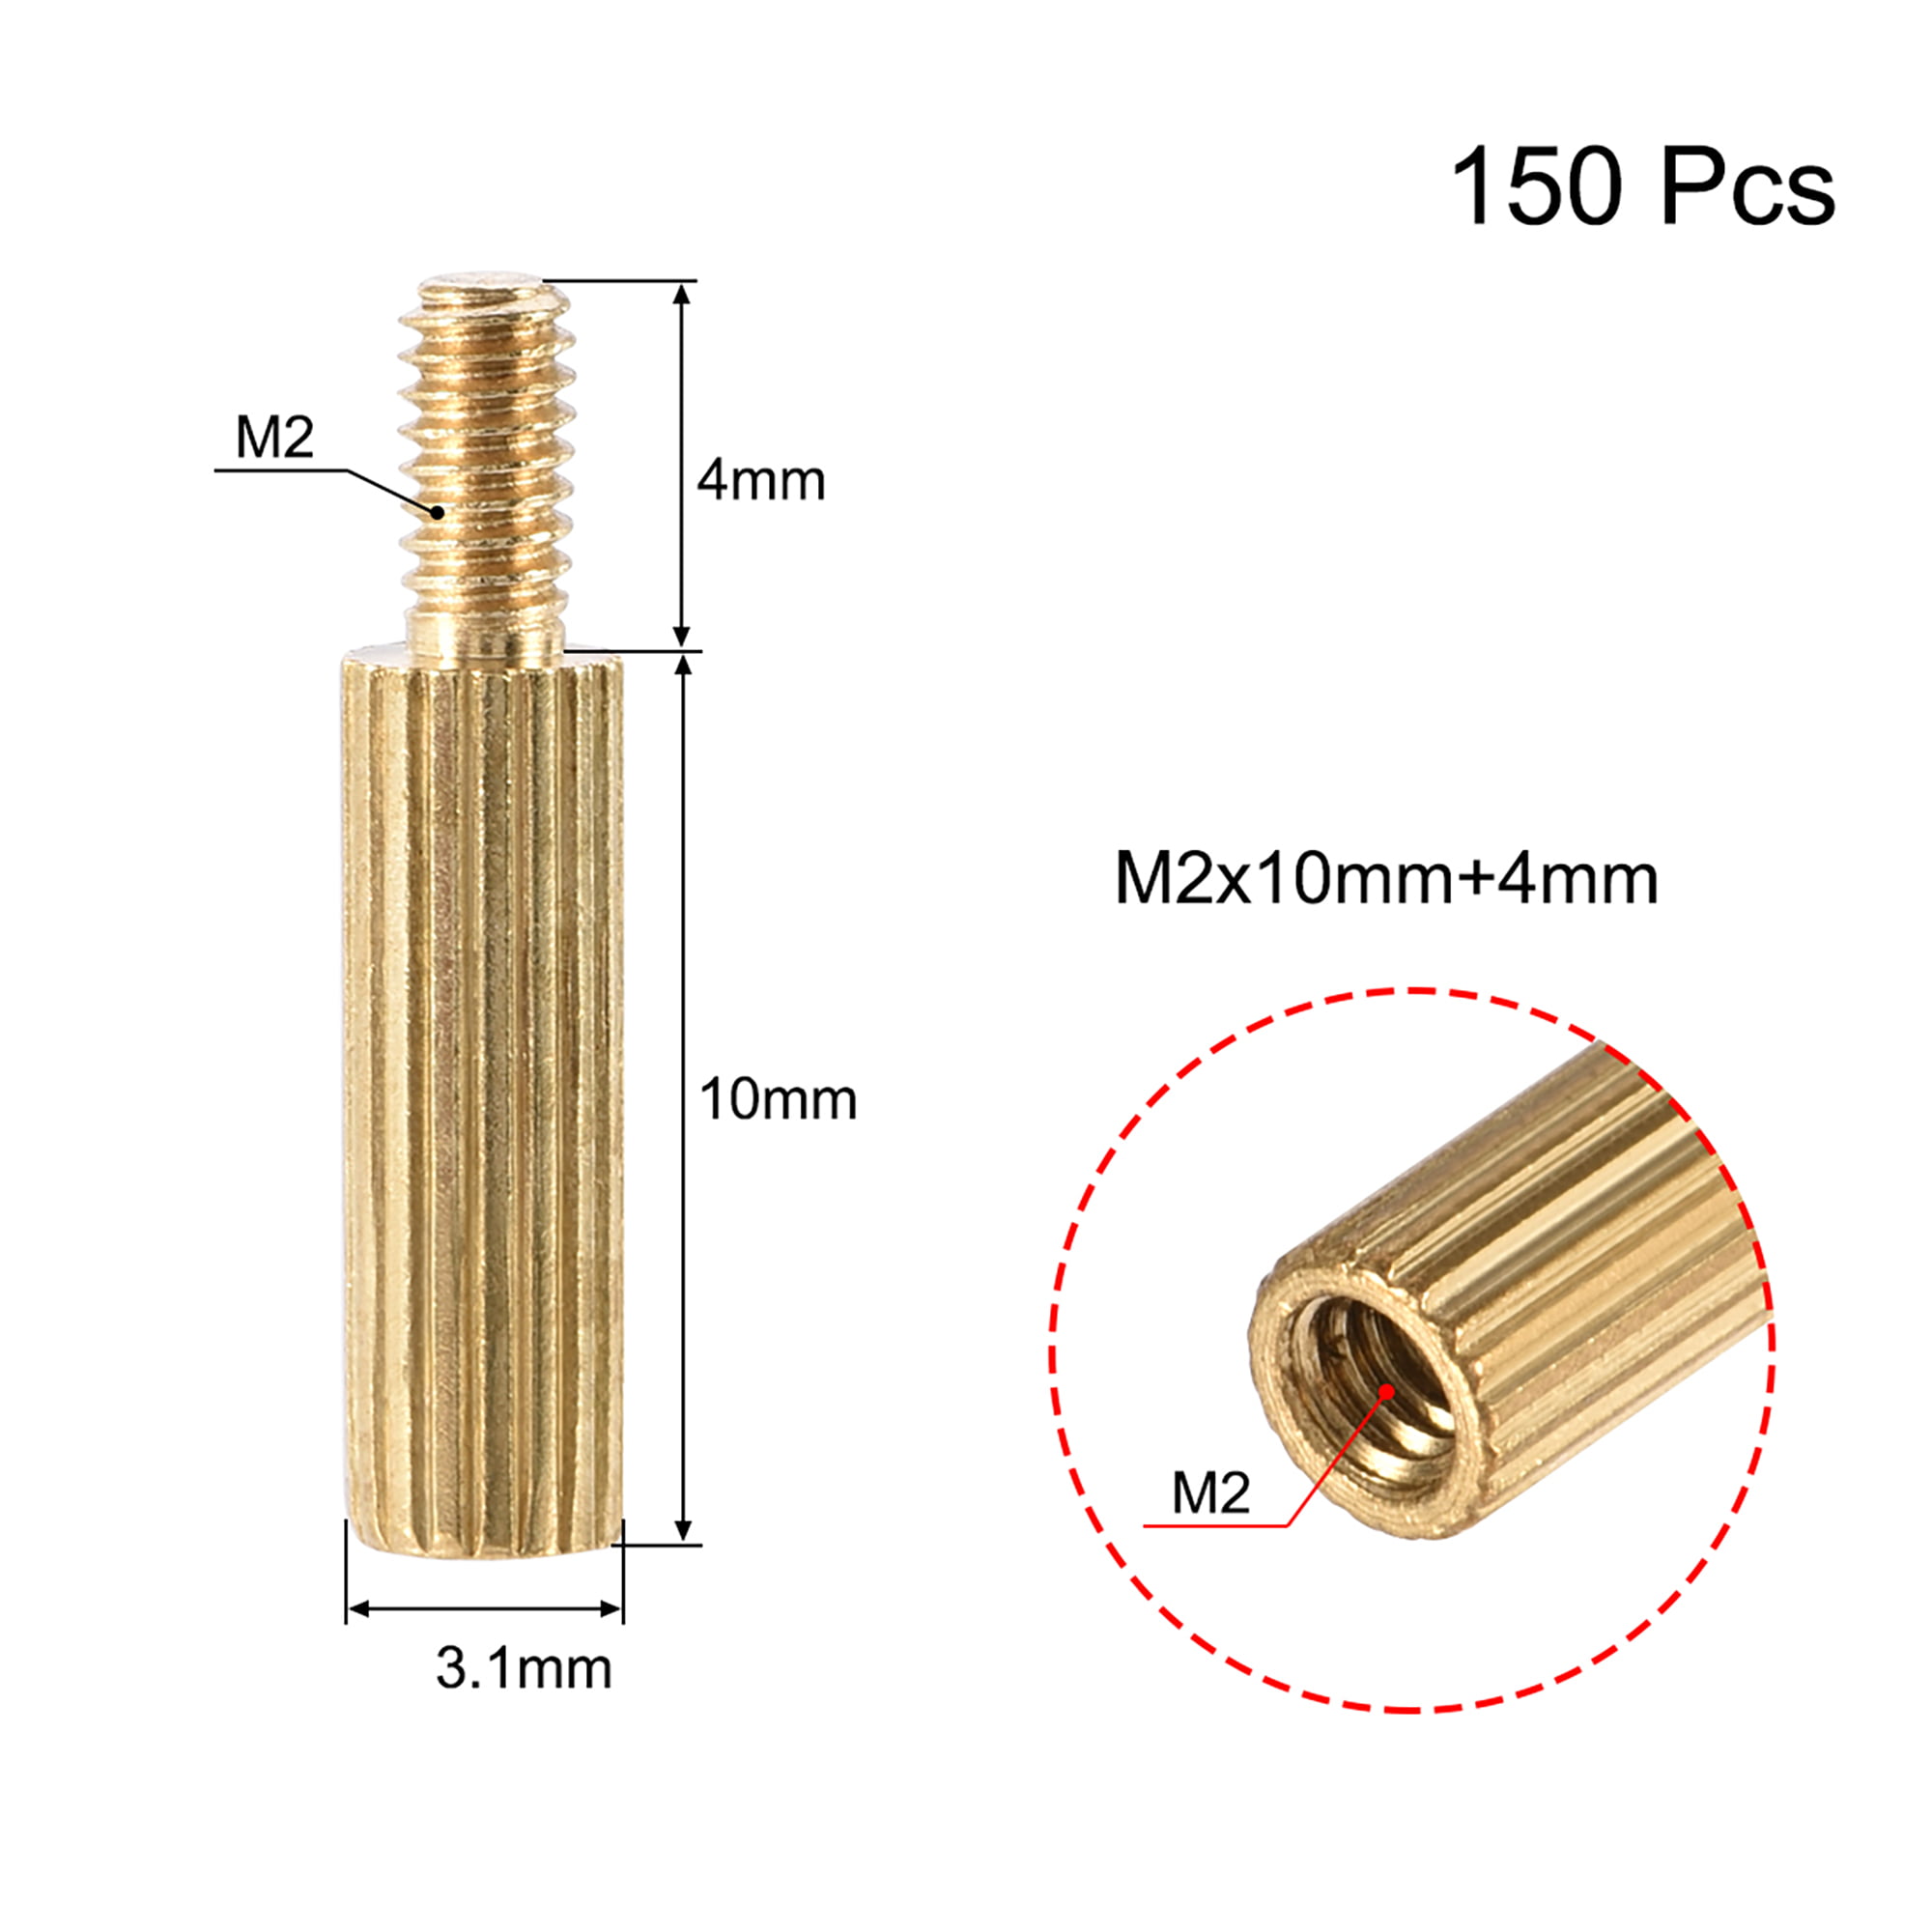 4 mm Male to Female Cylinder Knurled Brass Spacer Standoff 150pcs Details about   M2 x 10 mm 